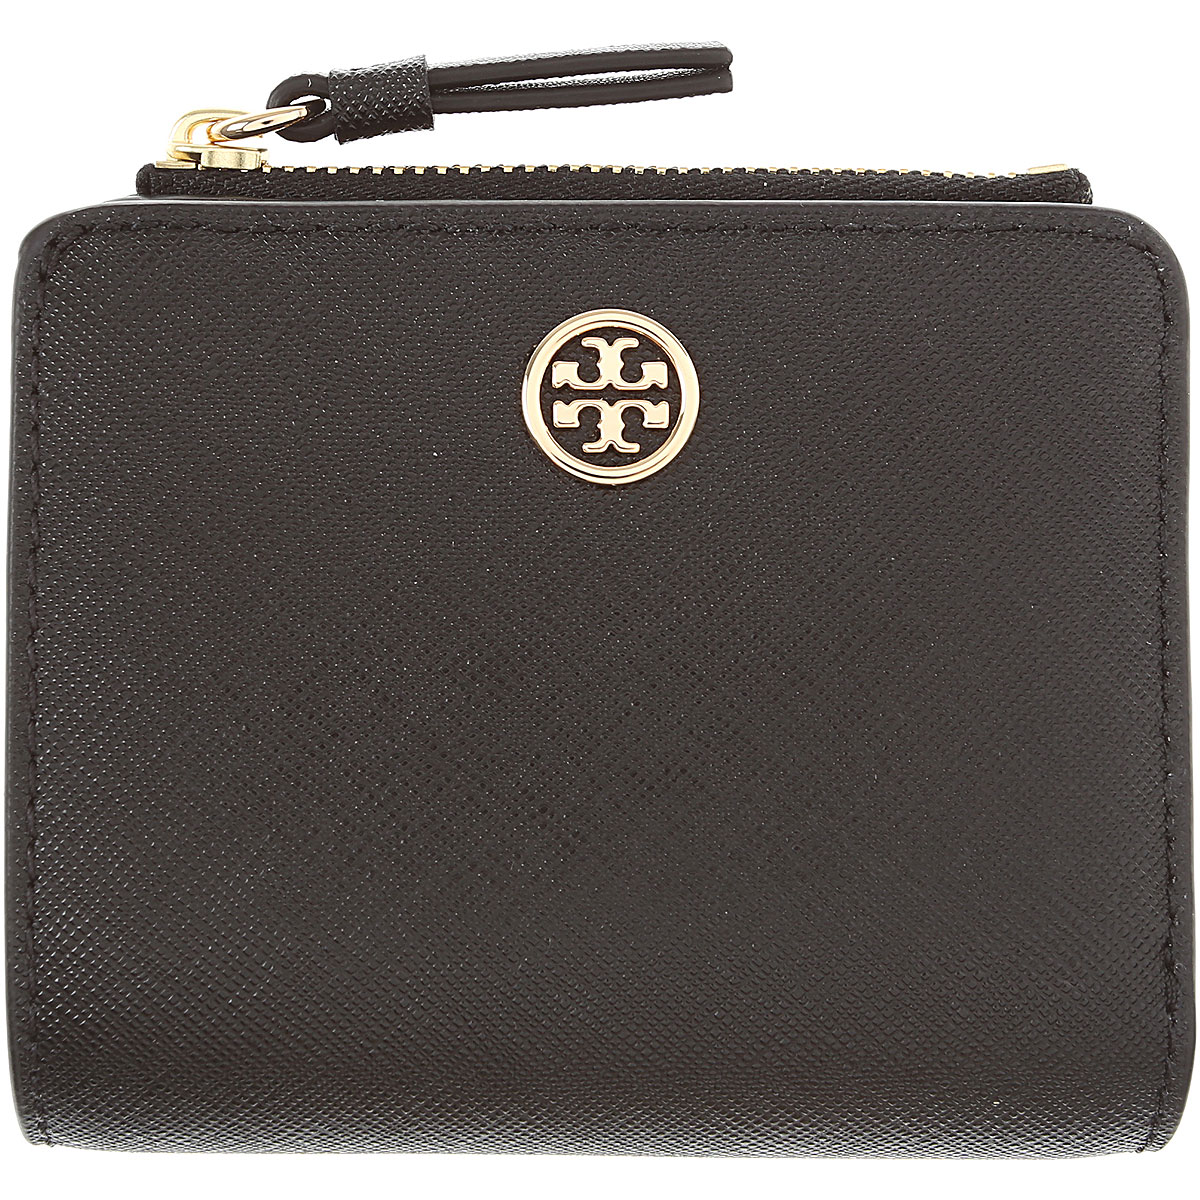 Womens Wallets Tory Burch, Style code: 54449-001-